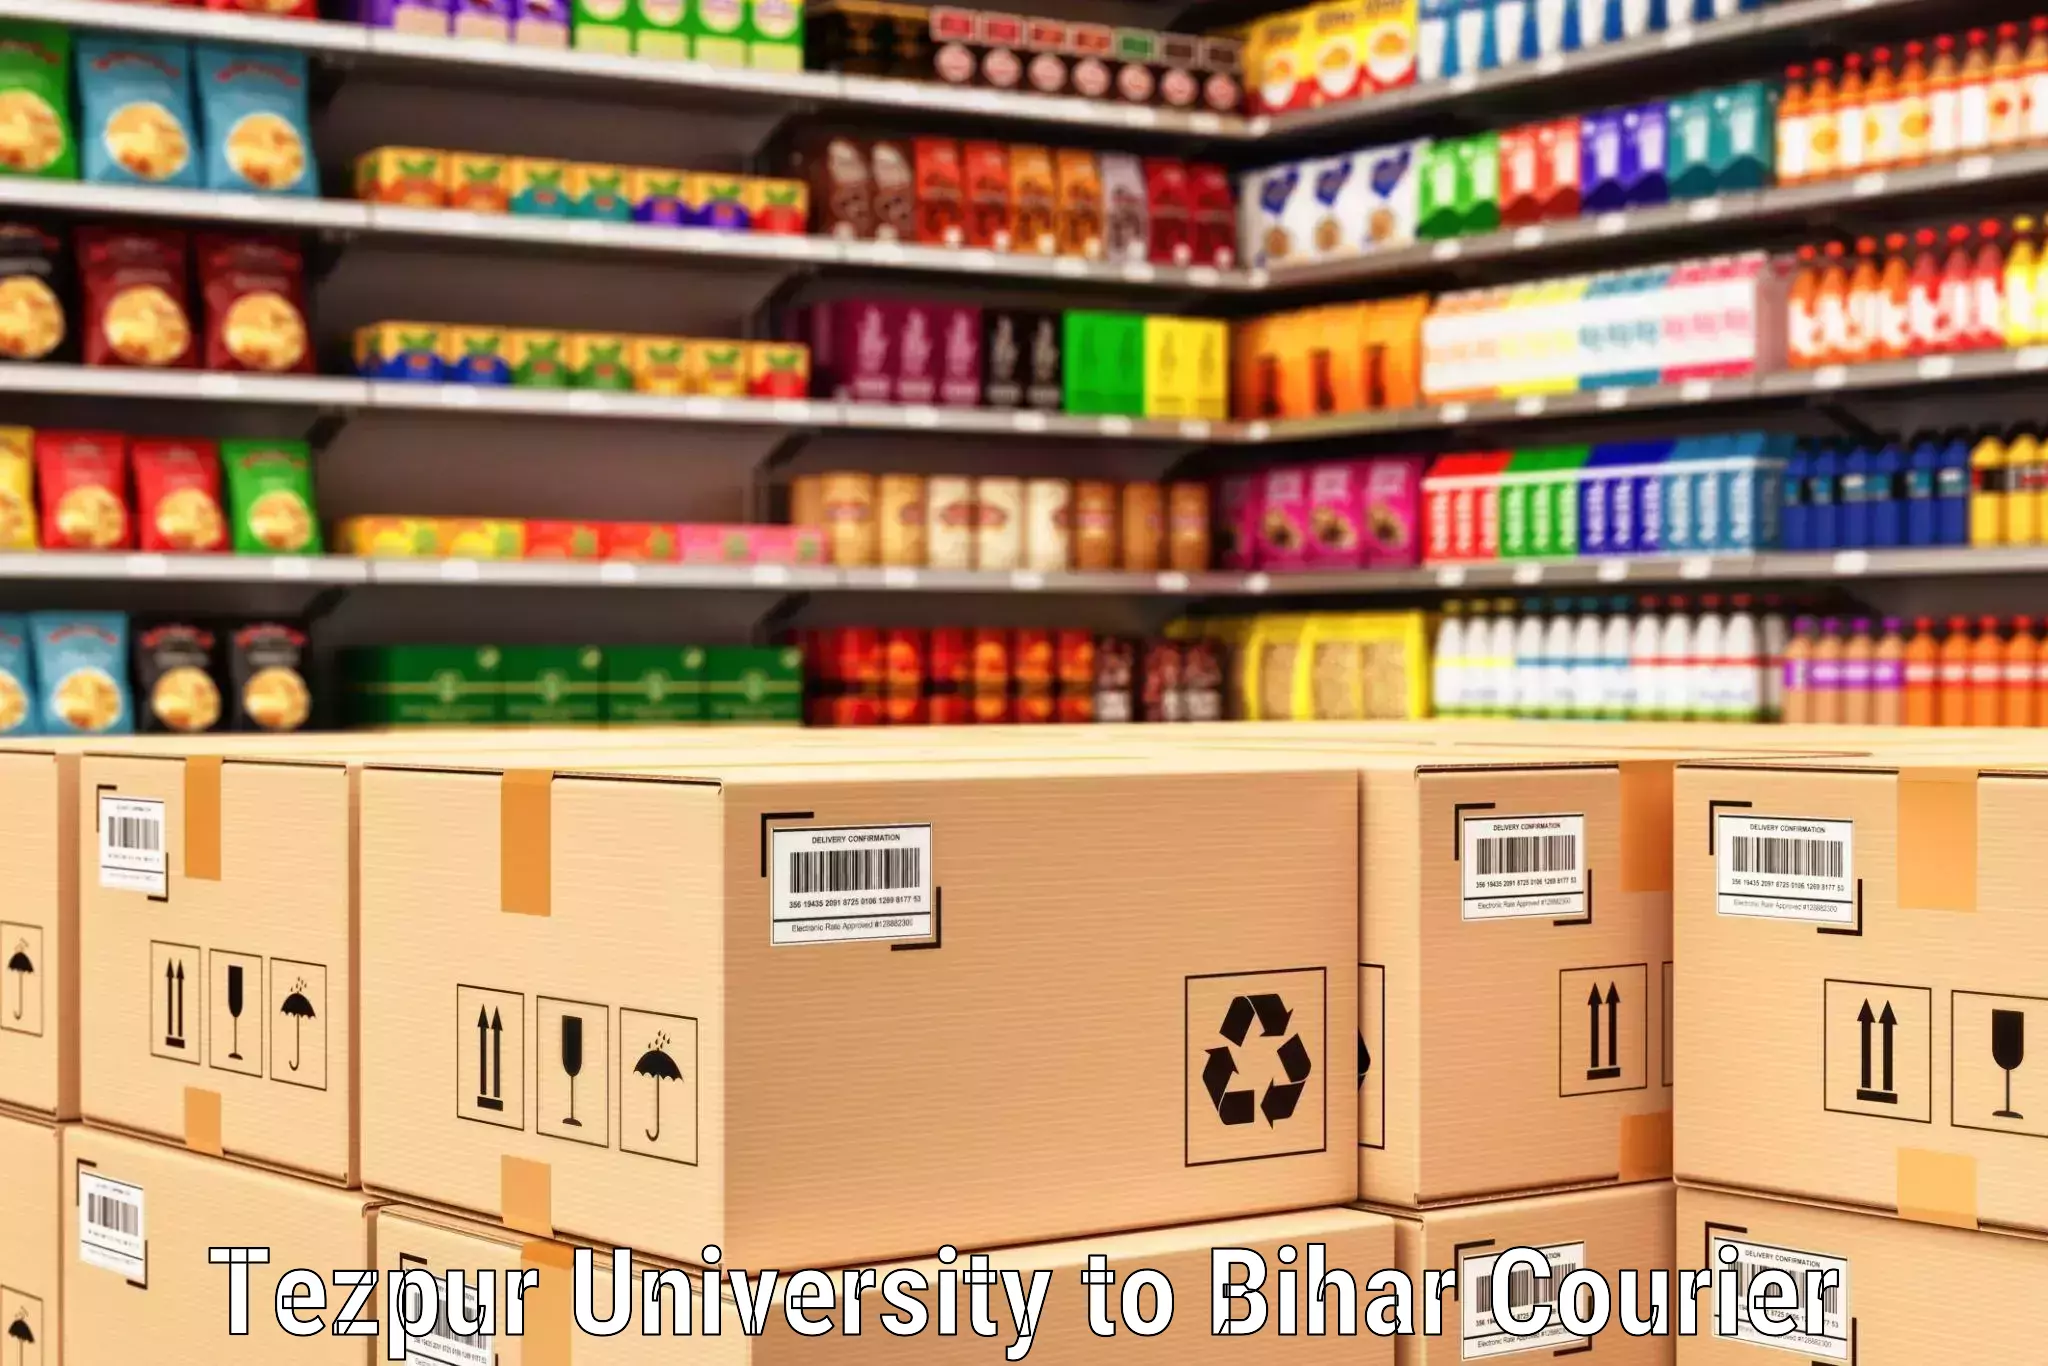 Package delivery network Tezpur University to Sikandara Jamui